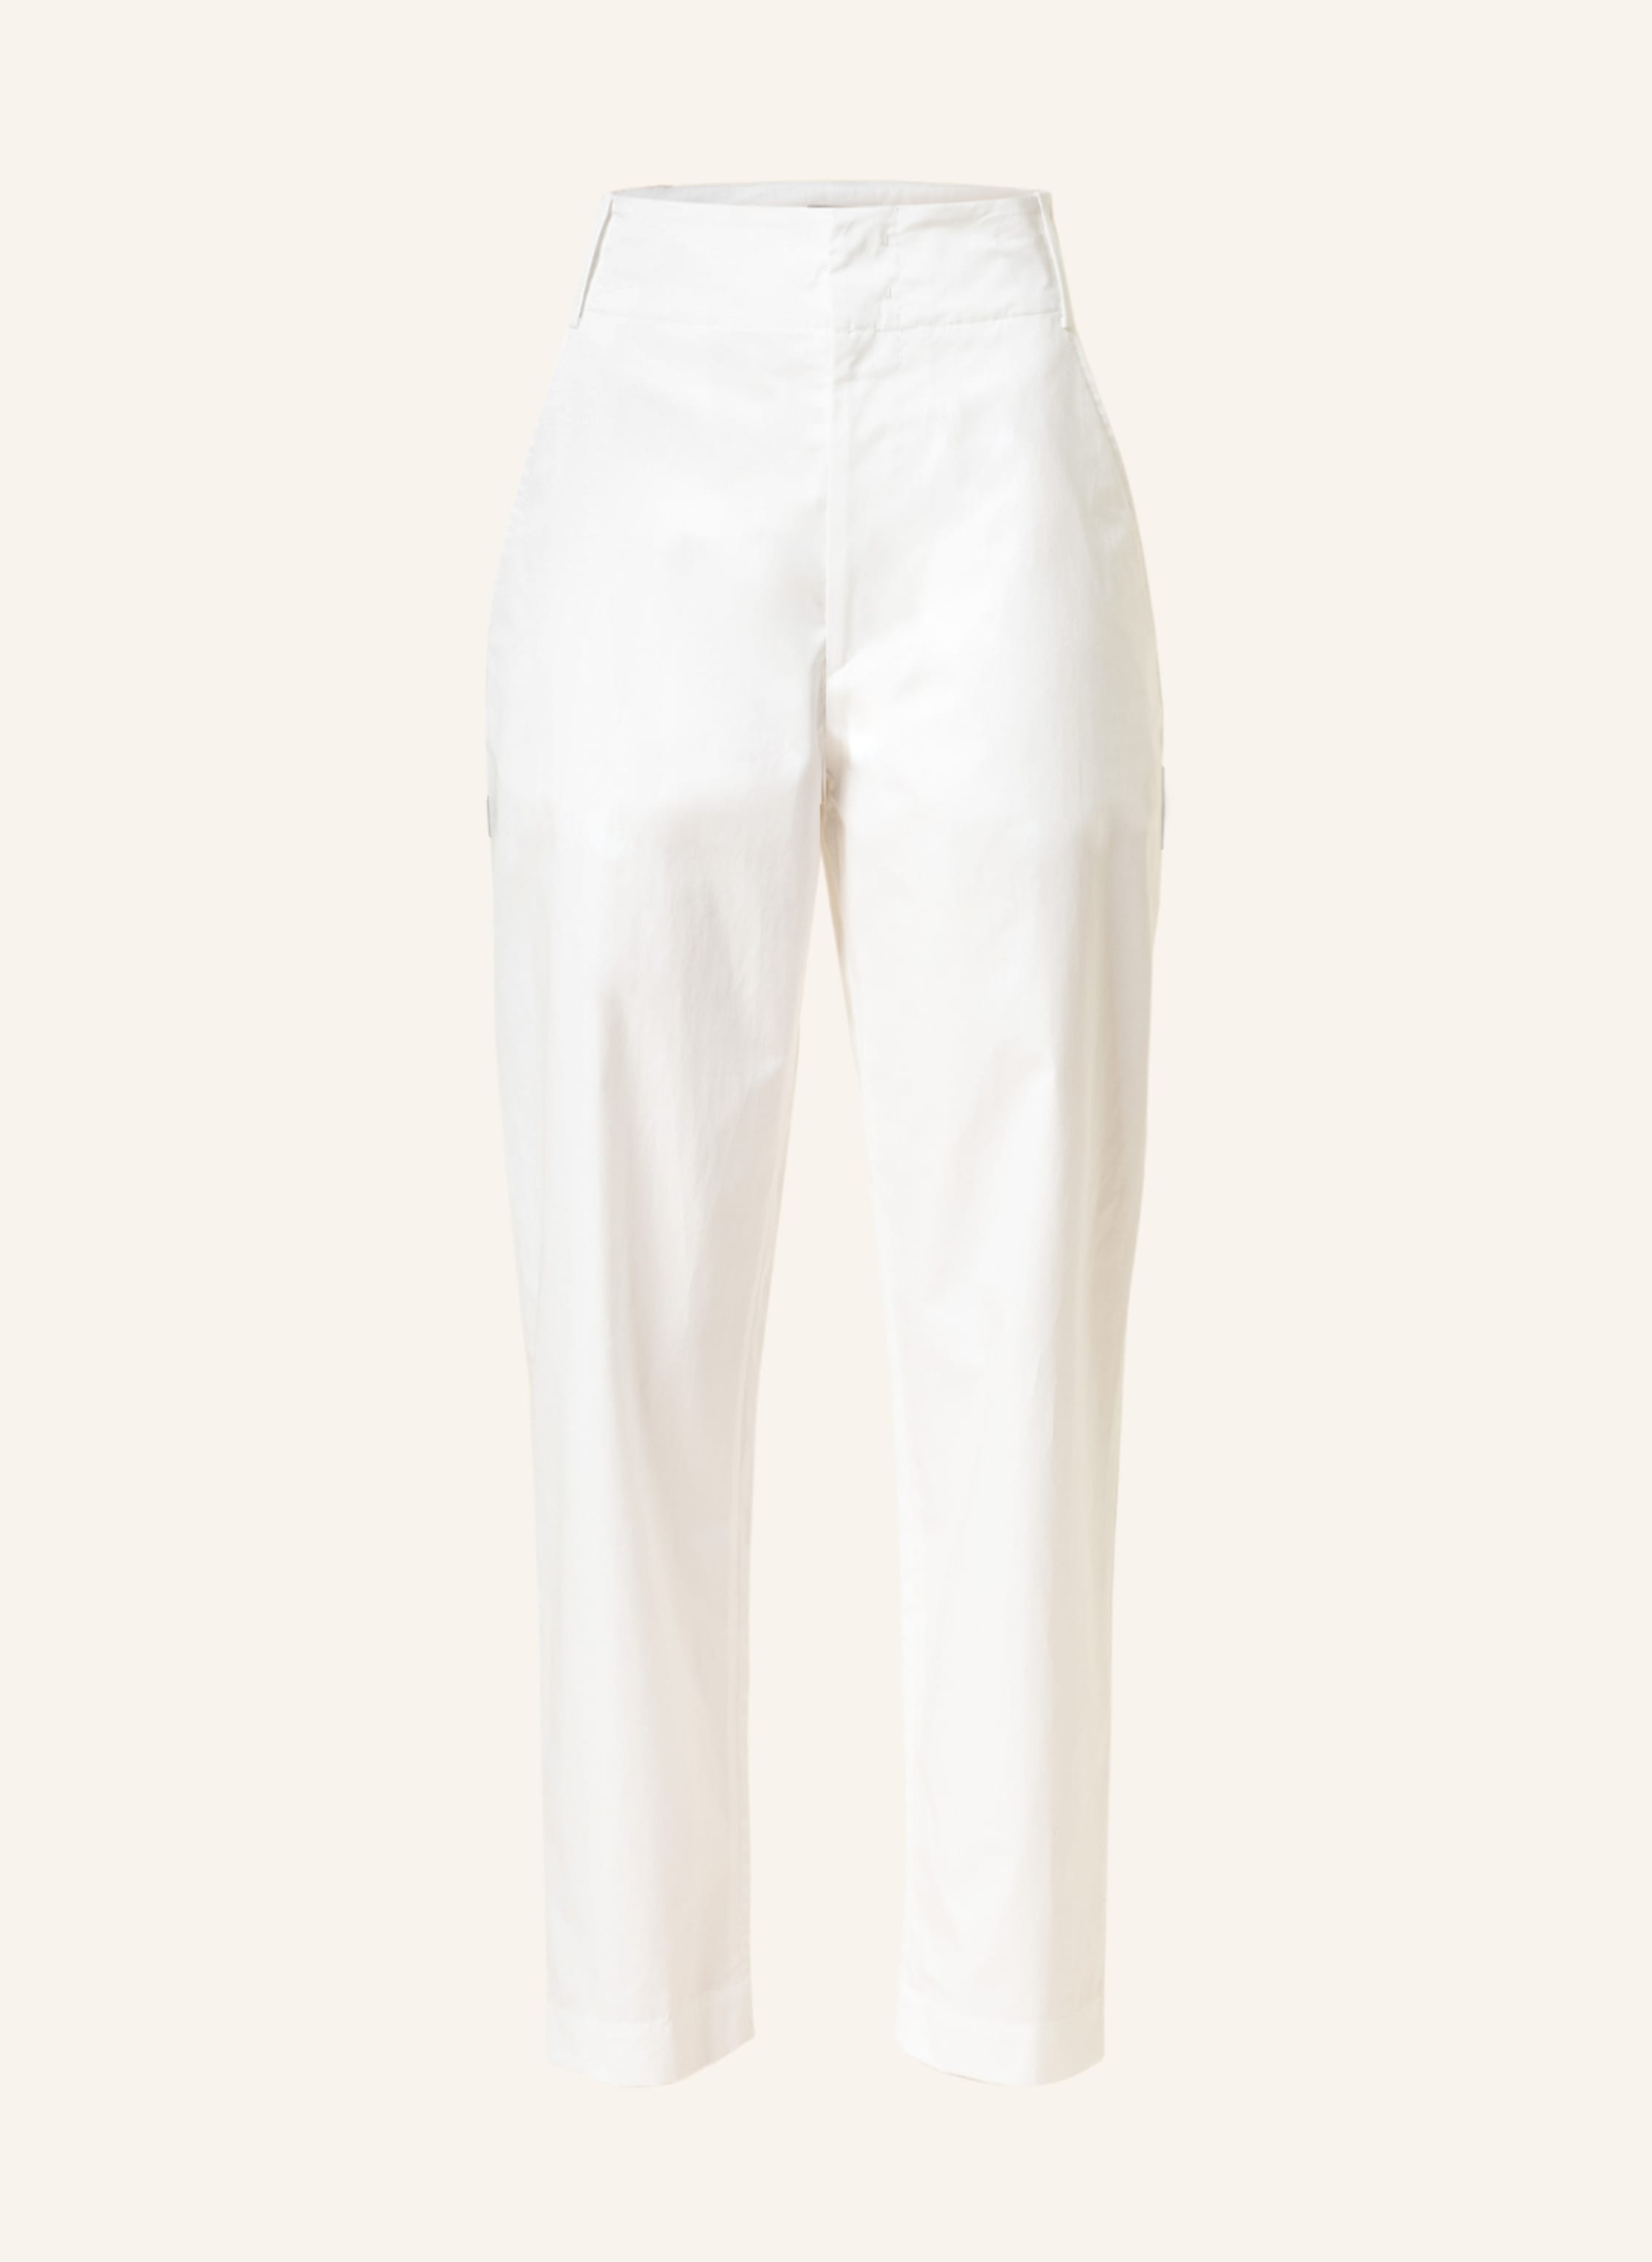 Womens Designer Trousers  Floral  Leather Trousers  Isabel Marant UK